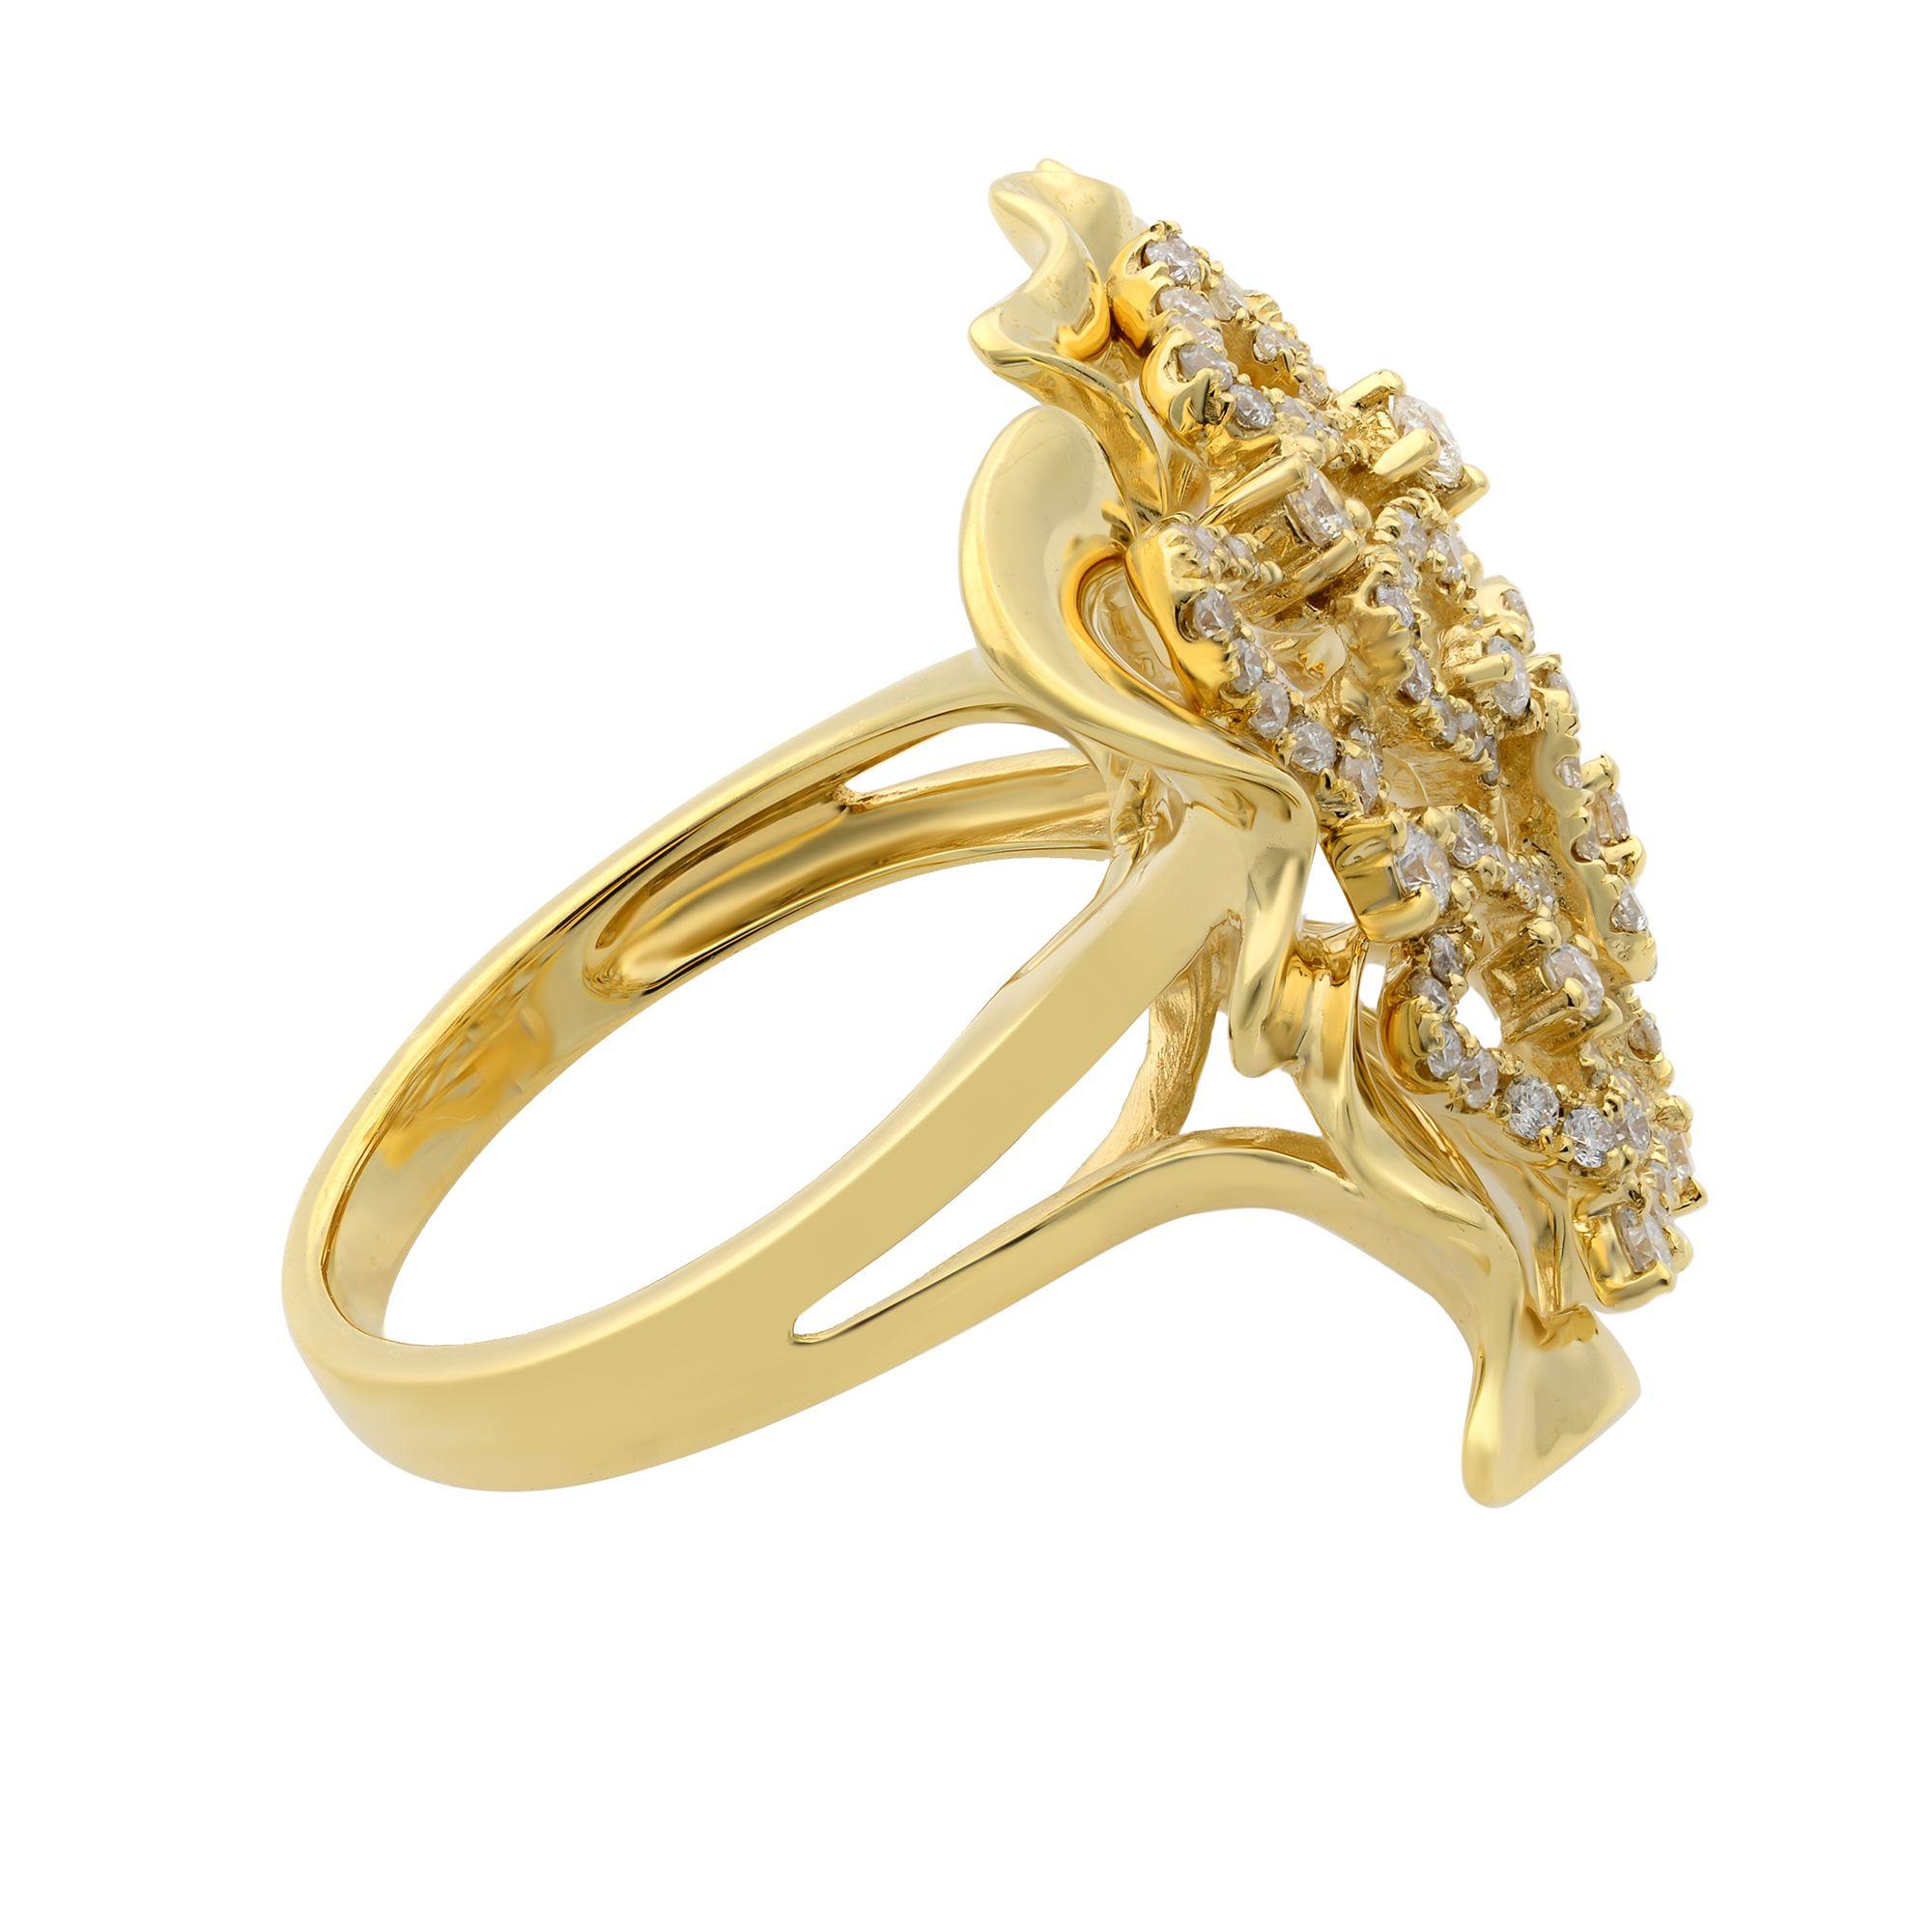 Round Cut Rachel Koen Large Floral Diamond Cocktail Ring 18K Yellow Gold 0.75cttw For Sale